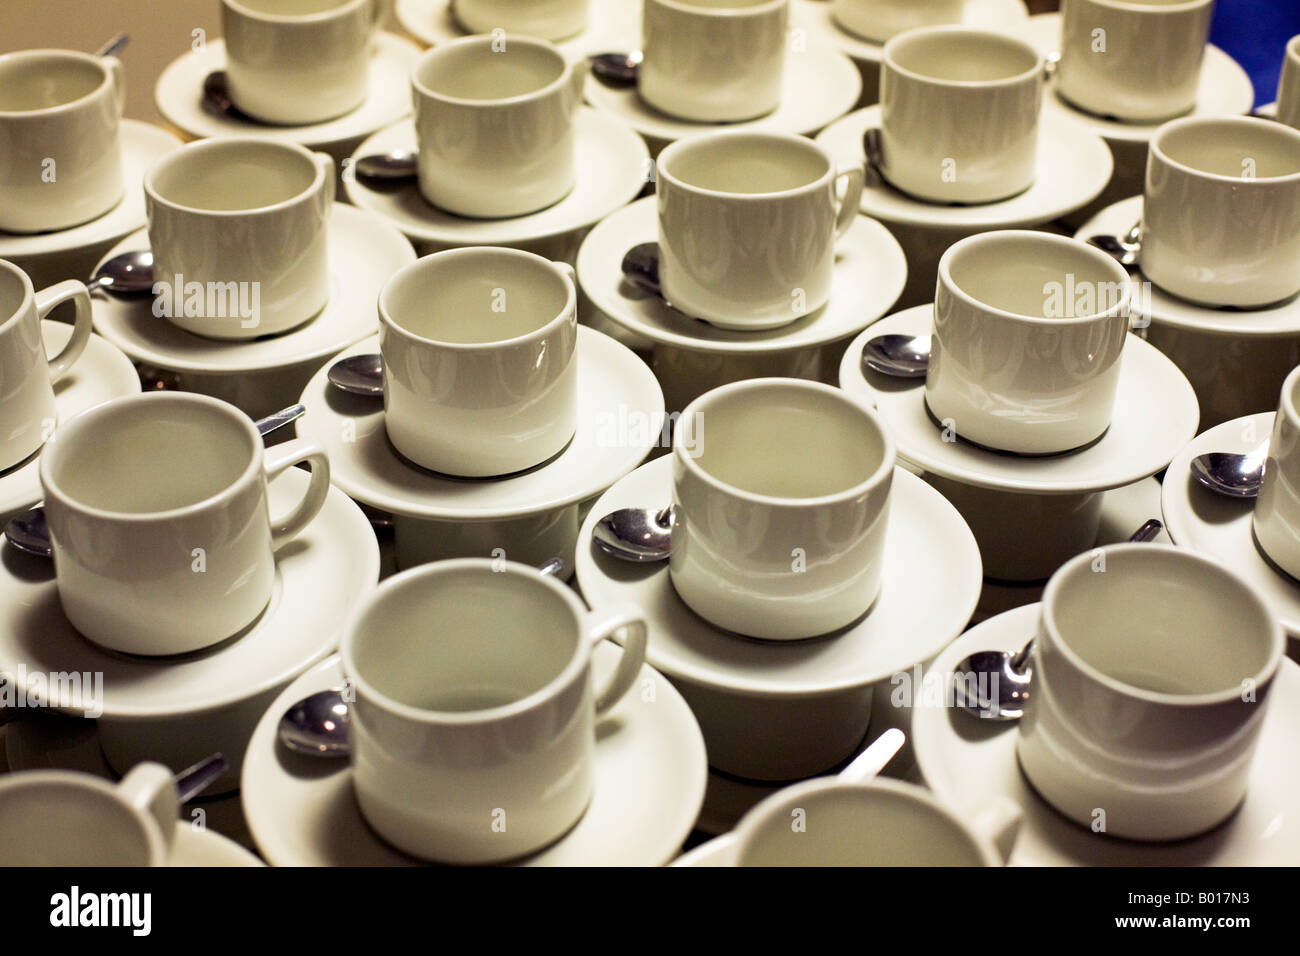 Many tea cups with spoons on saucers. Stock Photo